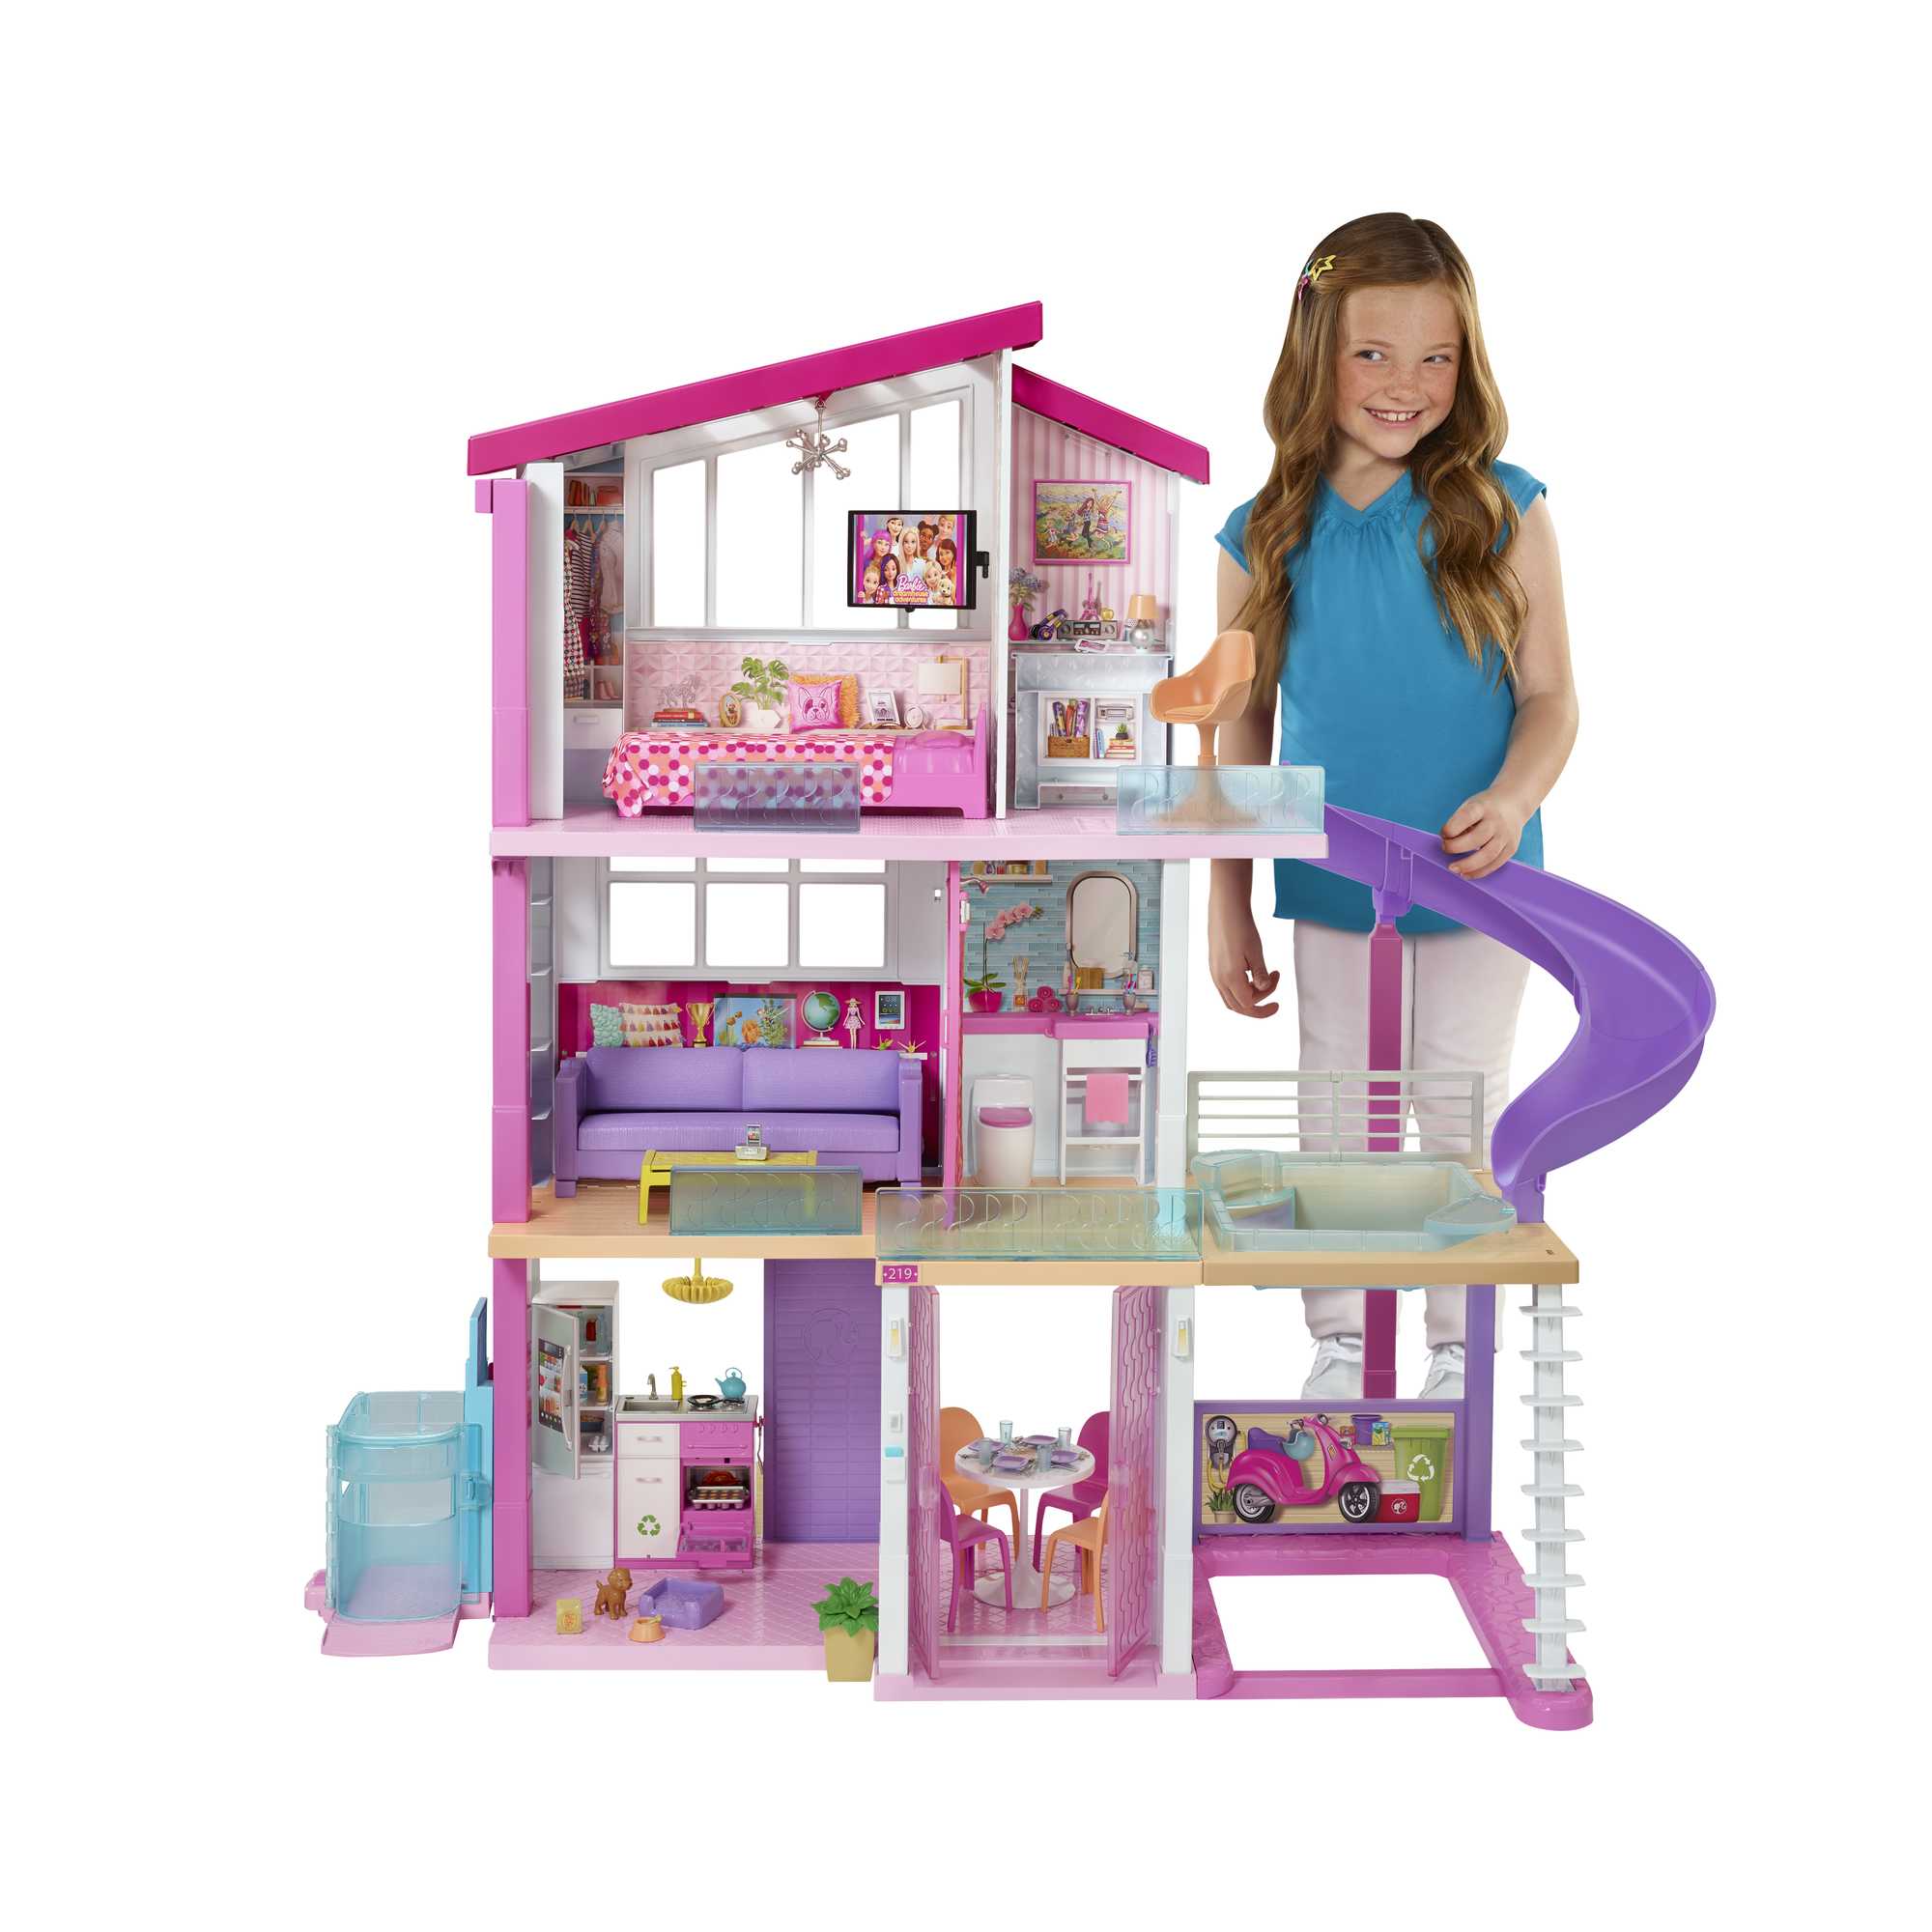 Dollhouse for Girls 2 Room Set Funny Doll House Play Set with Openable Door  Furniture